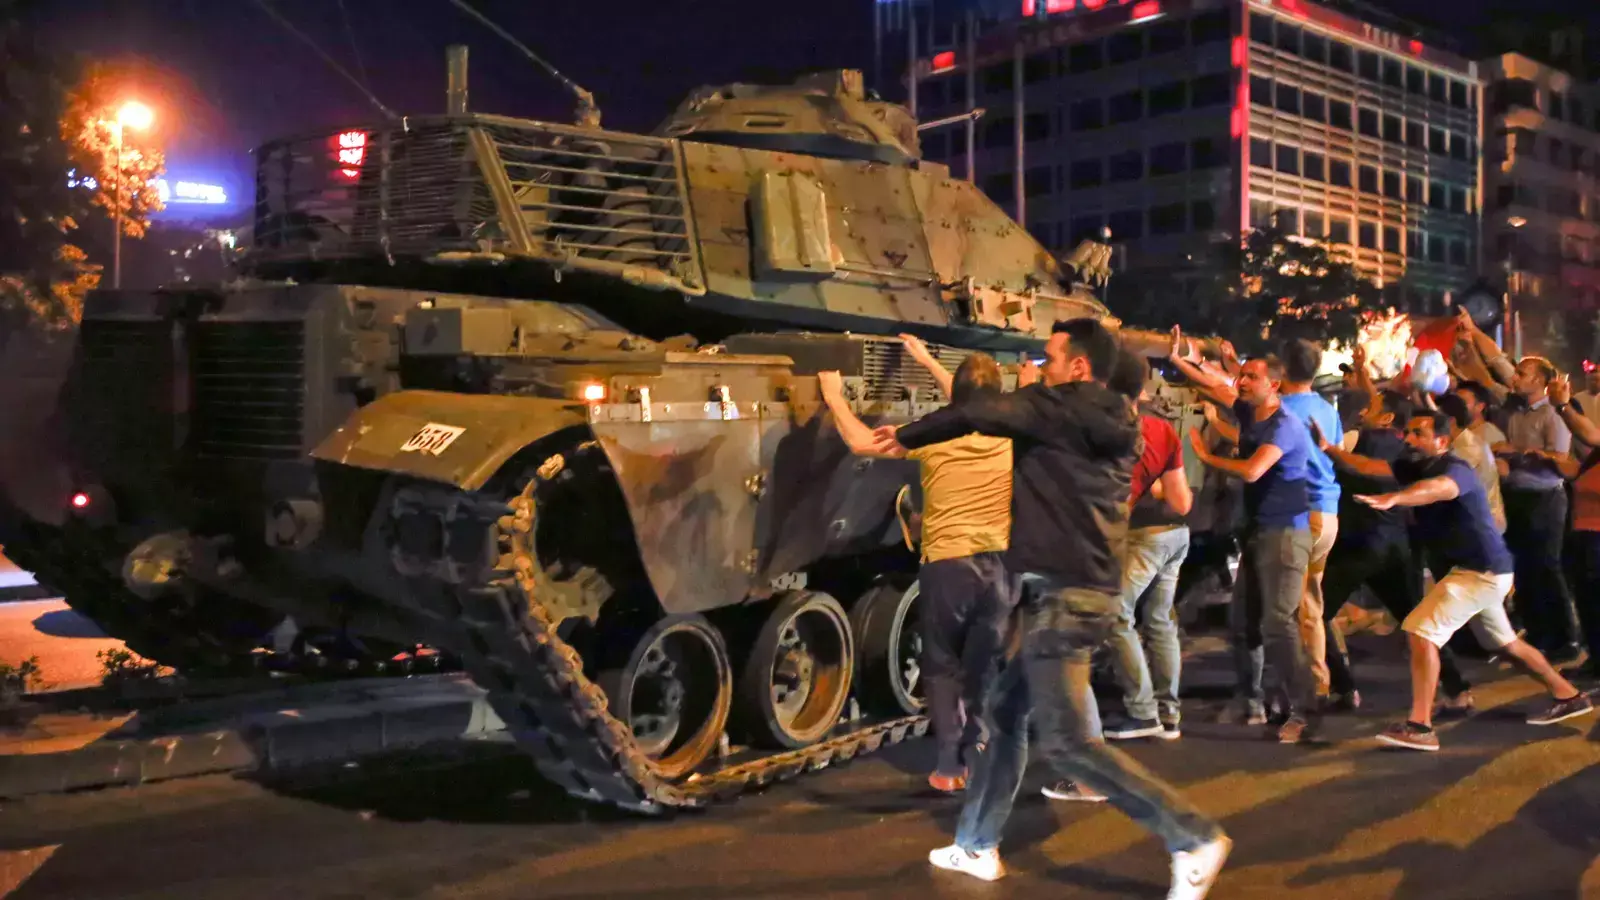 A deserted military tank from the July 2016 failed coup in Ankara, Turkey.